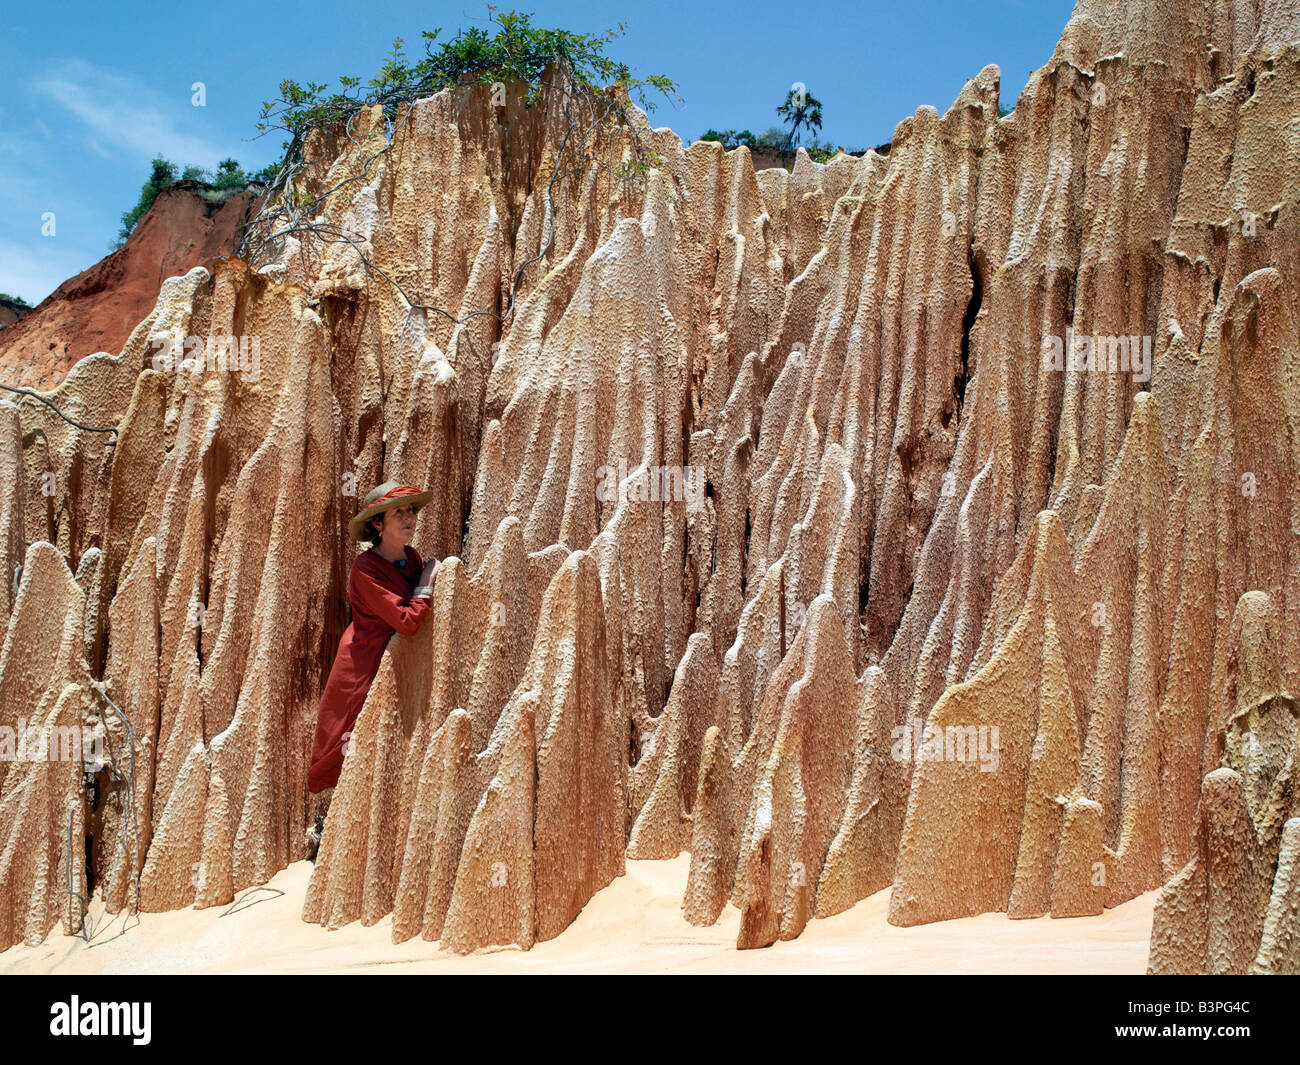 Northern Madagascar, Karst sandstone, known in Madagascar as tsingy, is a feature of a large ravine of ancient rock formations at Irodo, southeast of Antsiranana (Diego Suarez). A lady visitor gives scale to the impressively sharp red pinnacles, which are the result of millions of years of erosion. Tsingy is a Malagasy word meaning 'walking on tiptoe'. Stock Photo